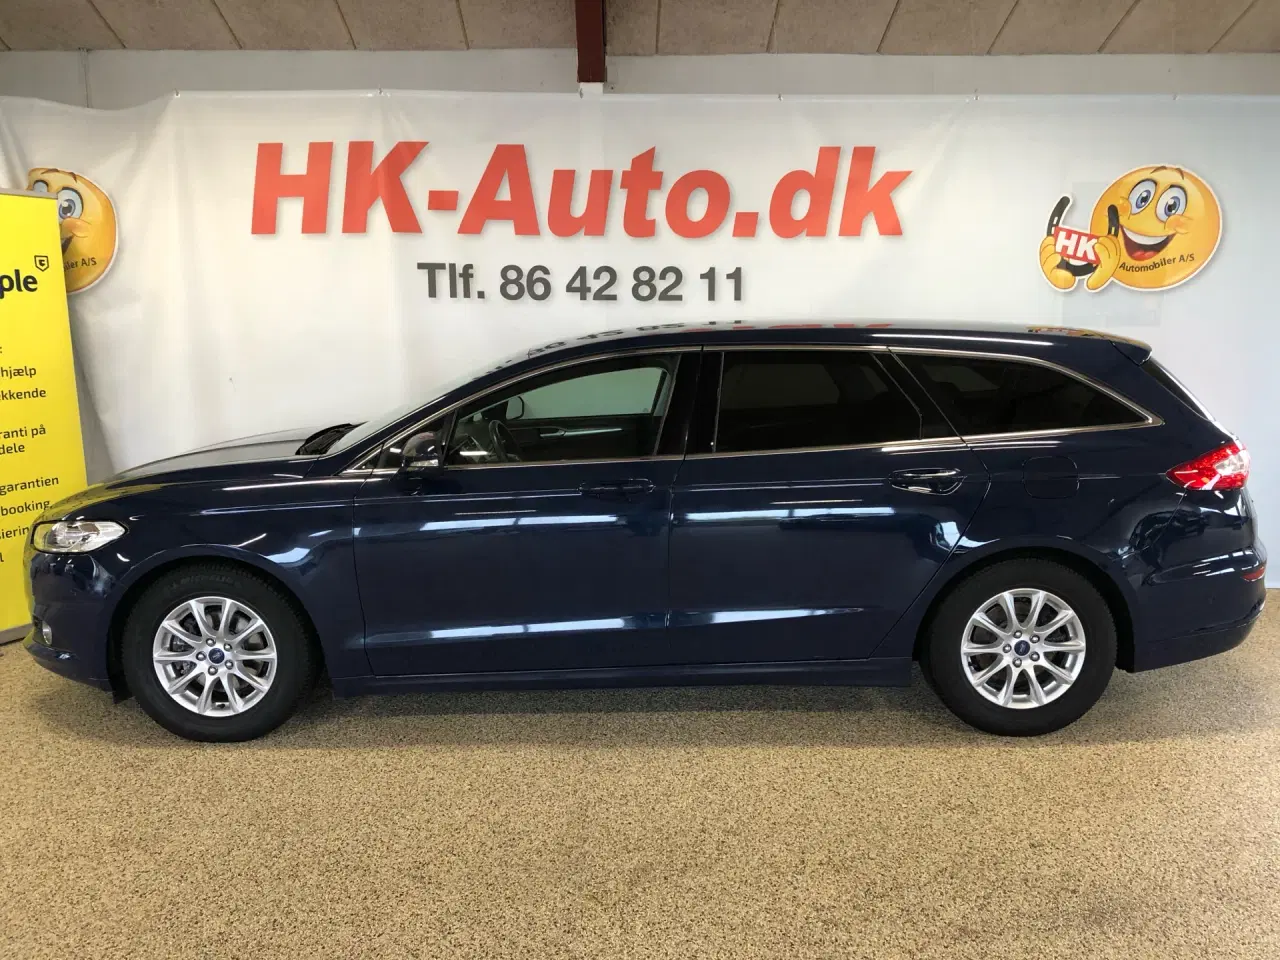 Billede 2 - Ford Mondeo 2,0 TDCi ECOnetic Trend 150HK Stc 6g